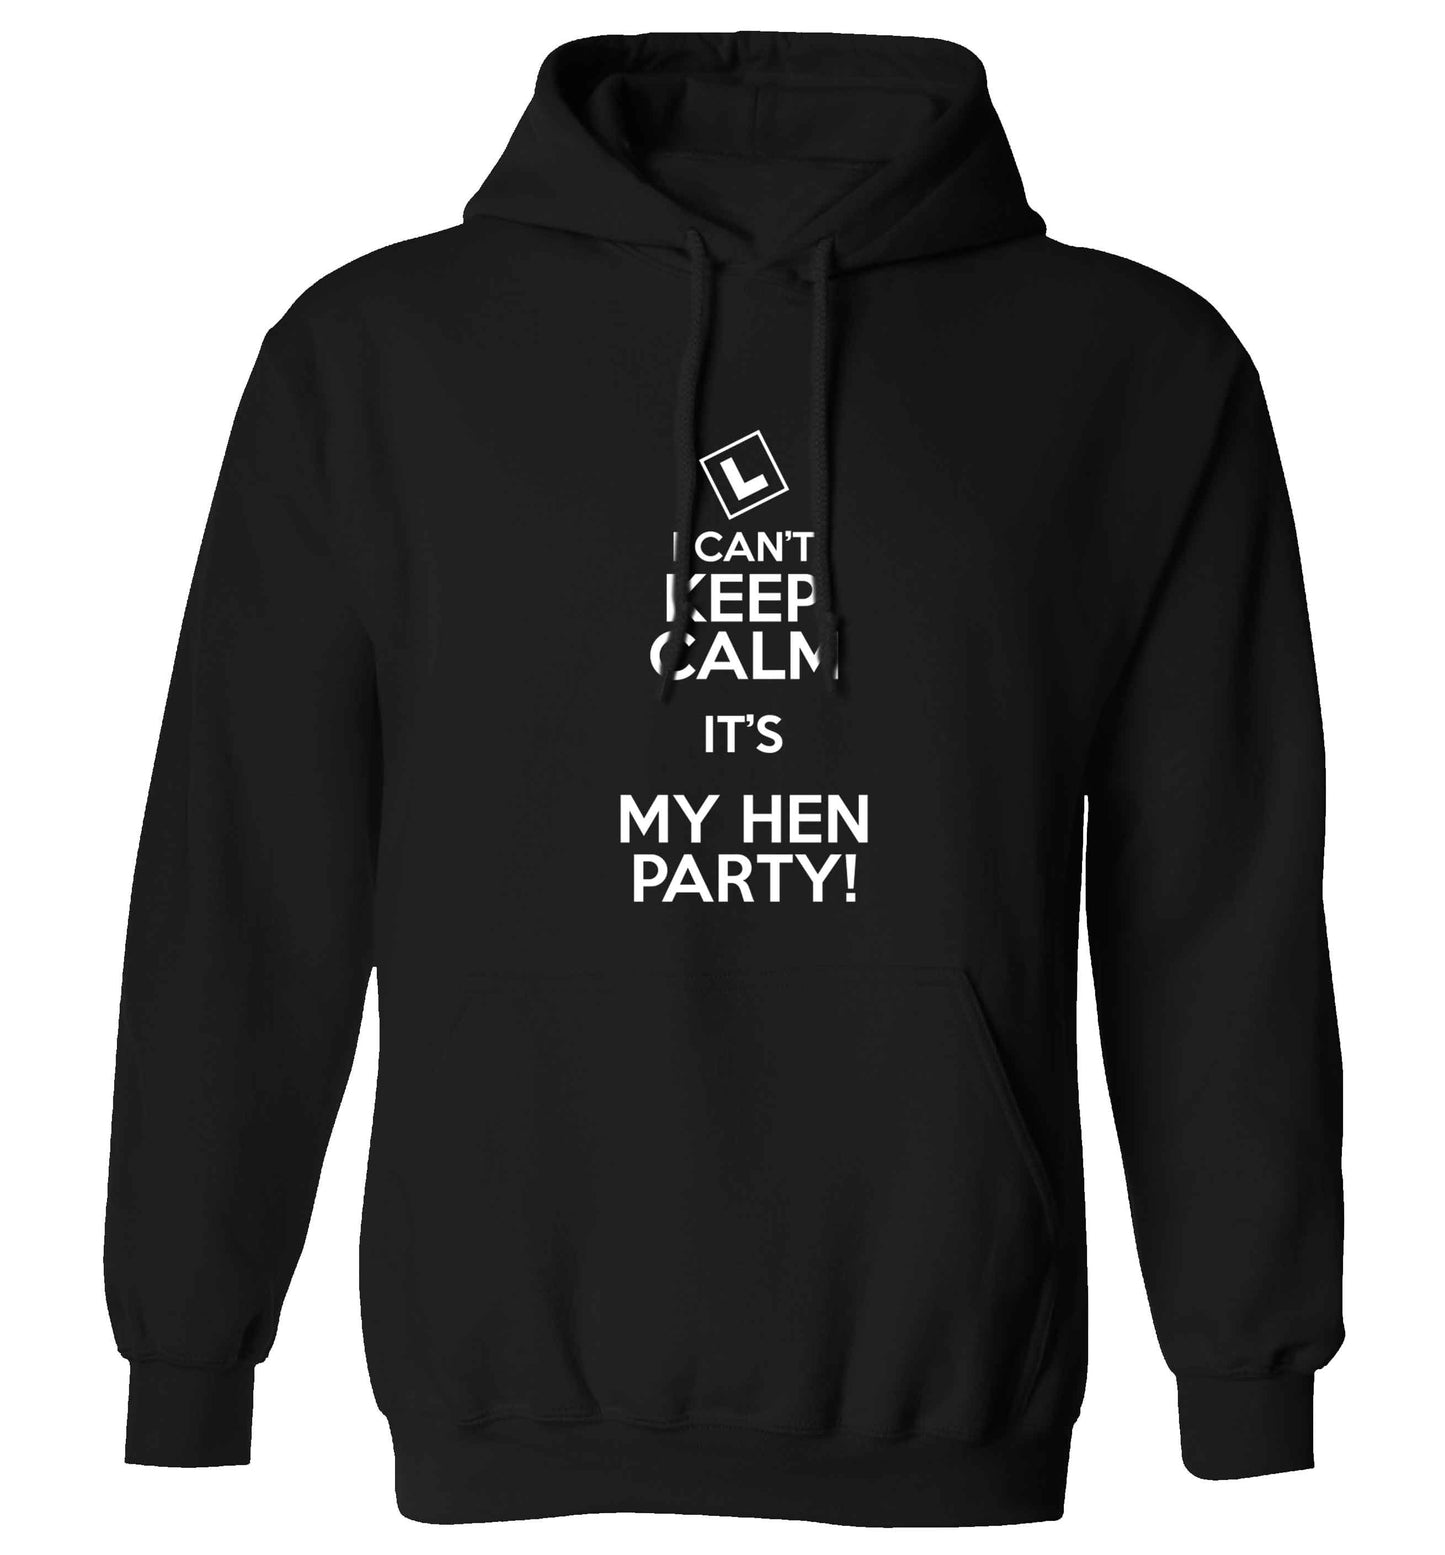 I can't keep calm it's my hen party adults unisex black hoodie 2XL